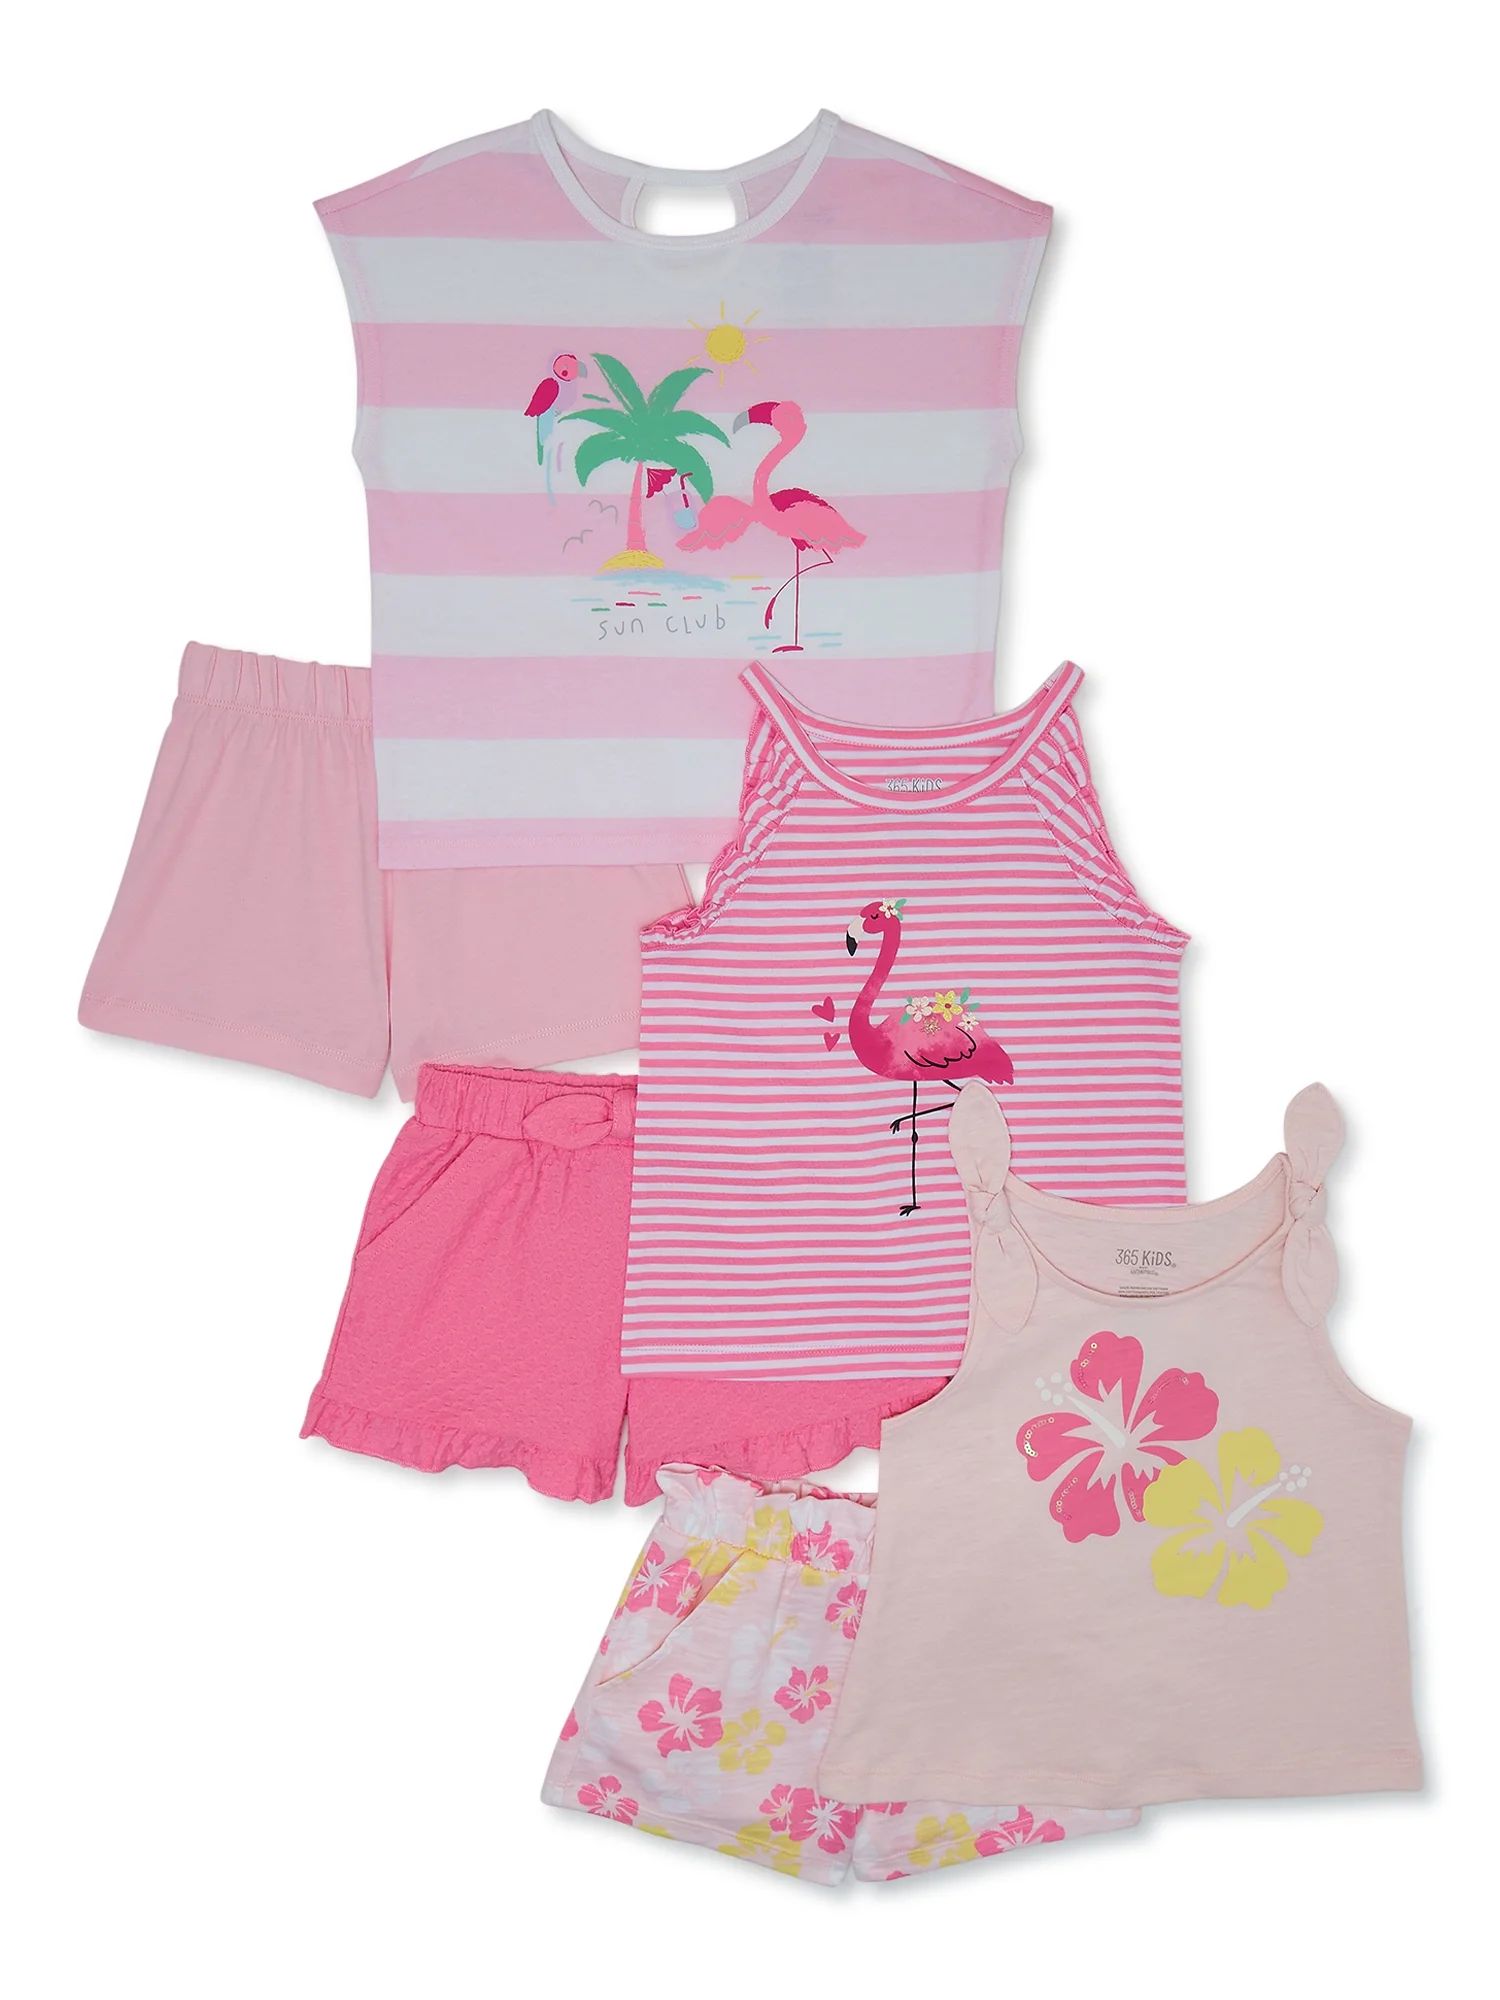 365 Kids from Garanimals Girls' Tank Top and Short Outfit Set, 6-pieces, Sizes 4-10 | Walmart (US)